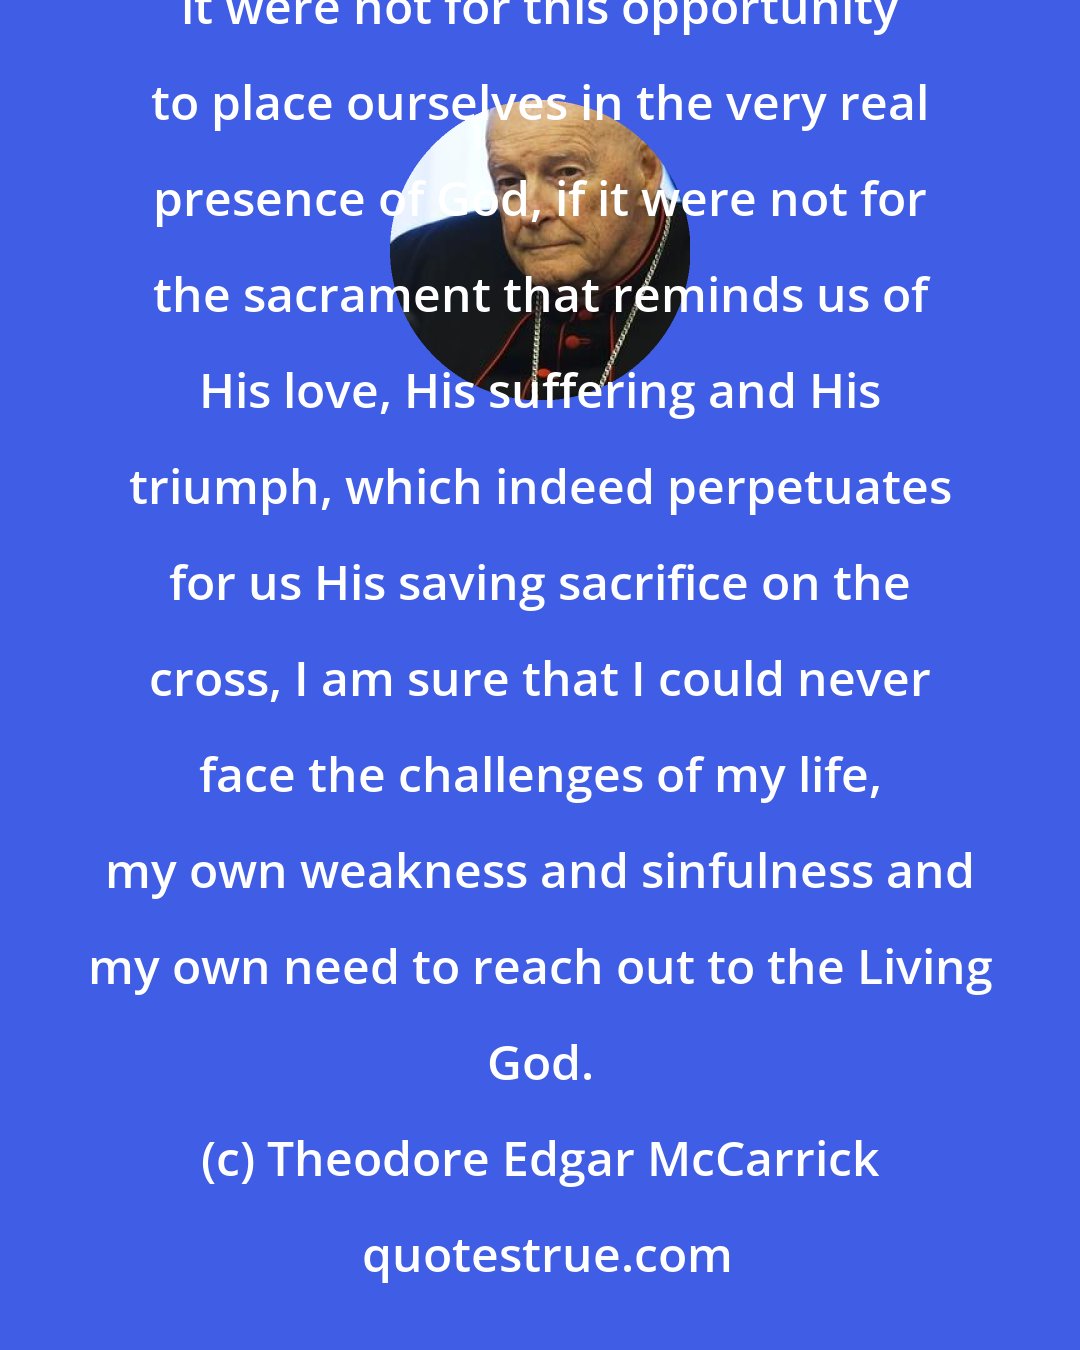 Theodore Edgar McCarrick: If it were not for the Eucharist, if it were not for this marvelous manifestation of God's love, if it were not for this opportunity to place ourselves in the very real presence of God, if it were not for the sacrament that reminds us of His love, His suffering and His triumph, which indeed perpetuates for us His saving sacrifice on the cross, I am sure that I could never face the challenges of my life, my own weakness and sinfulness and my own need to reach out to the Living God.